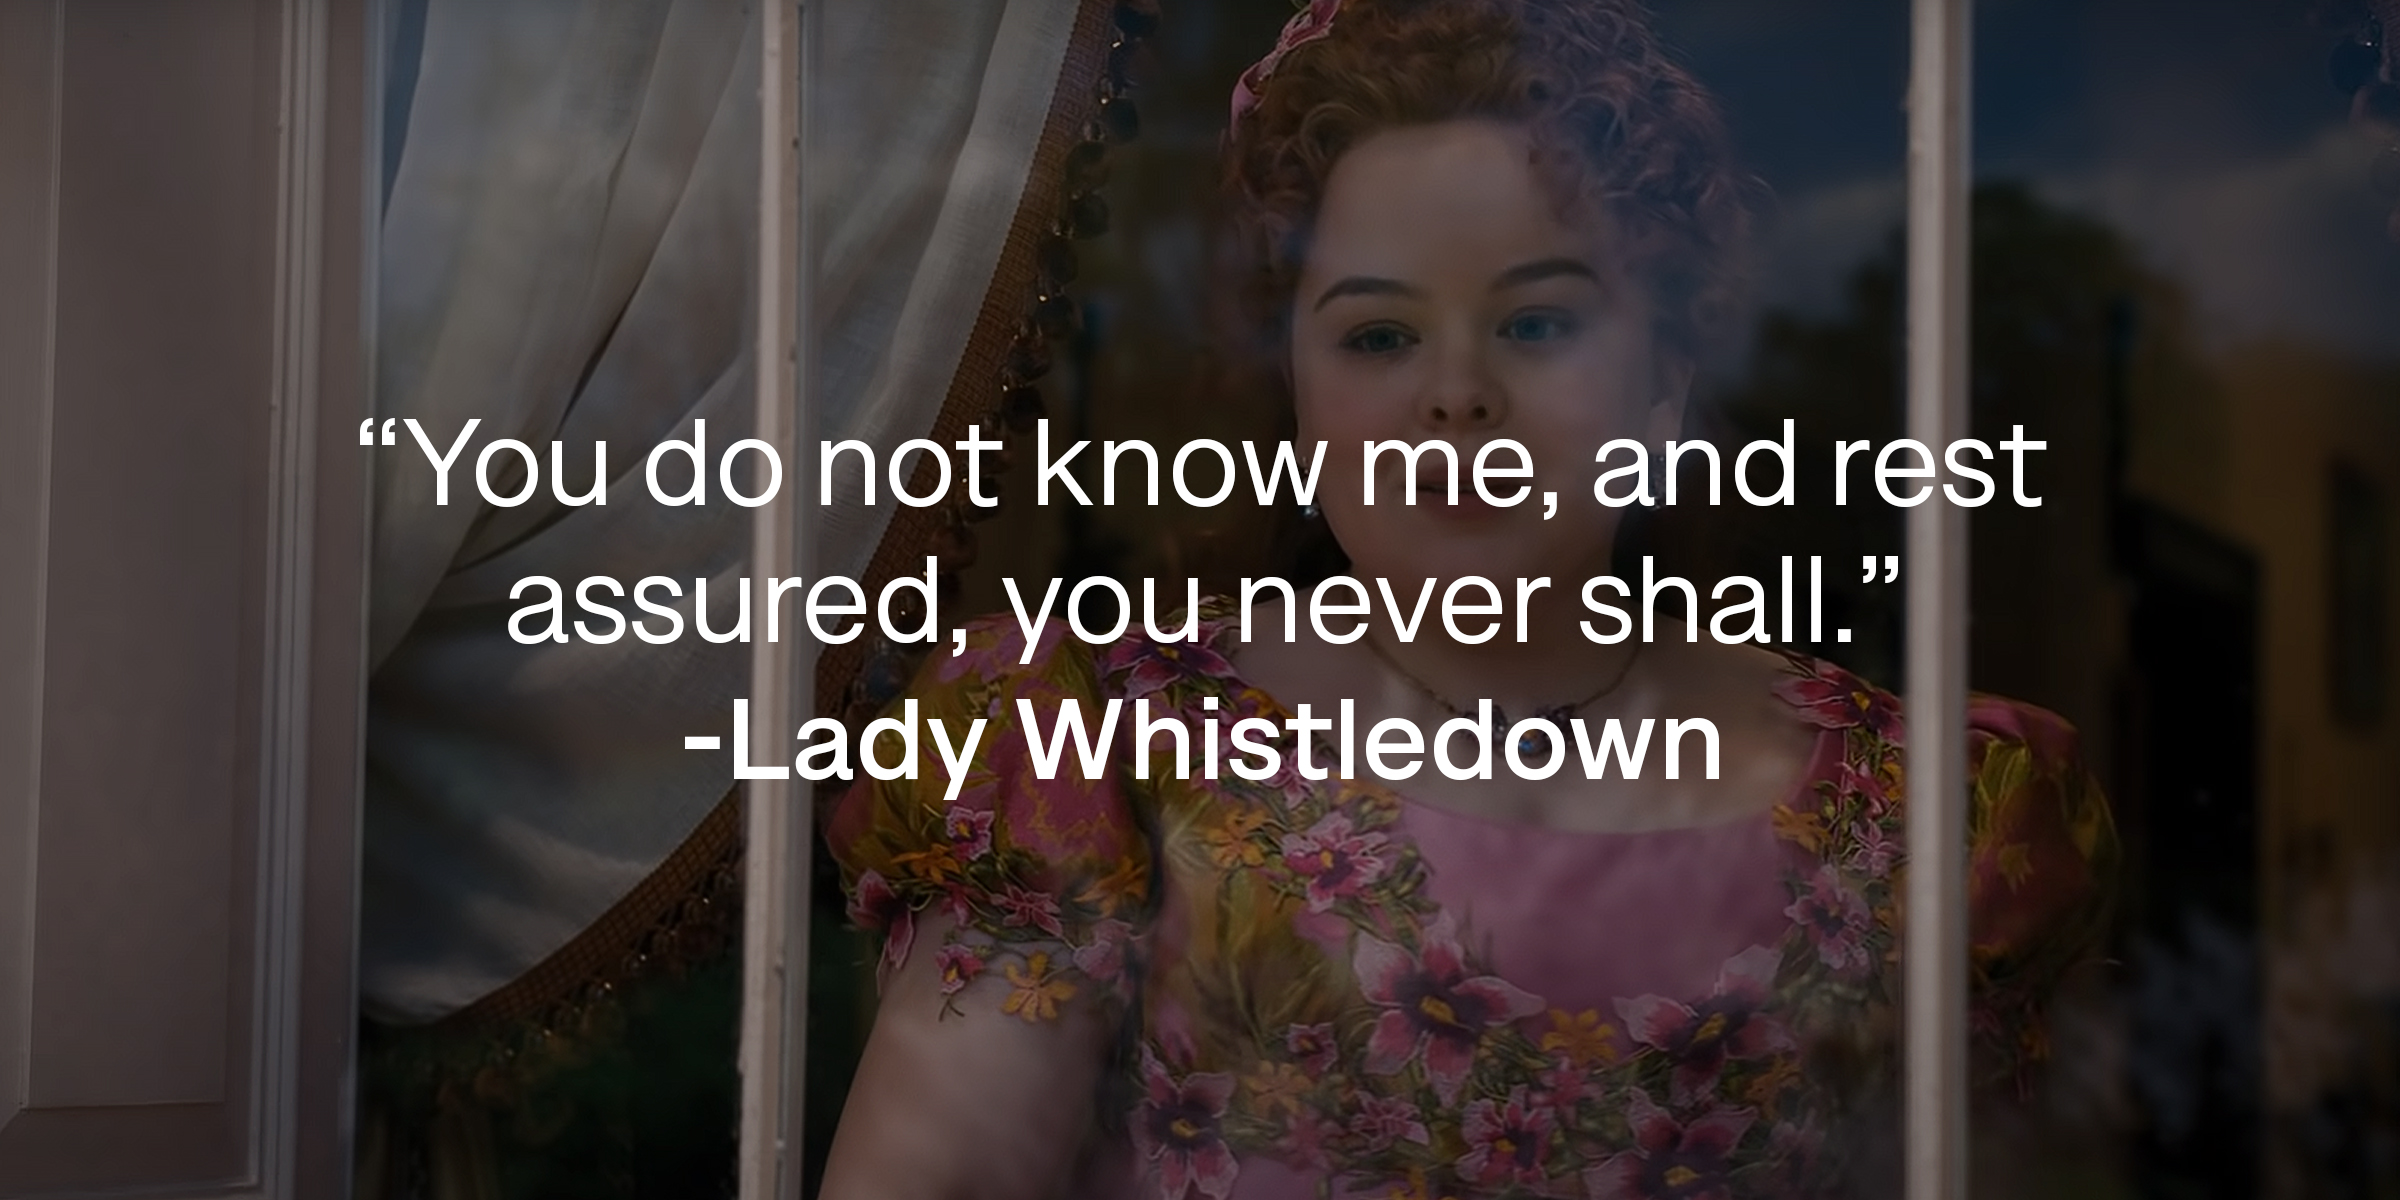 An image of Lady Whistledown with her quote: "You do not know me, and rest assured, you never shall." | Source: Youtube.com/Netflix